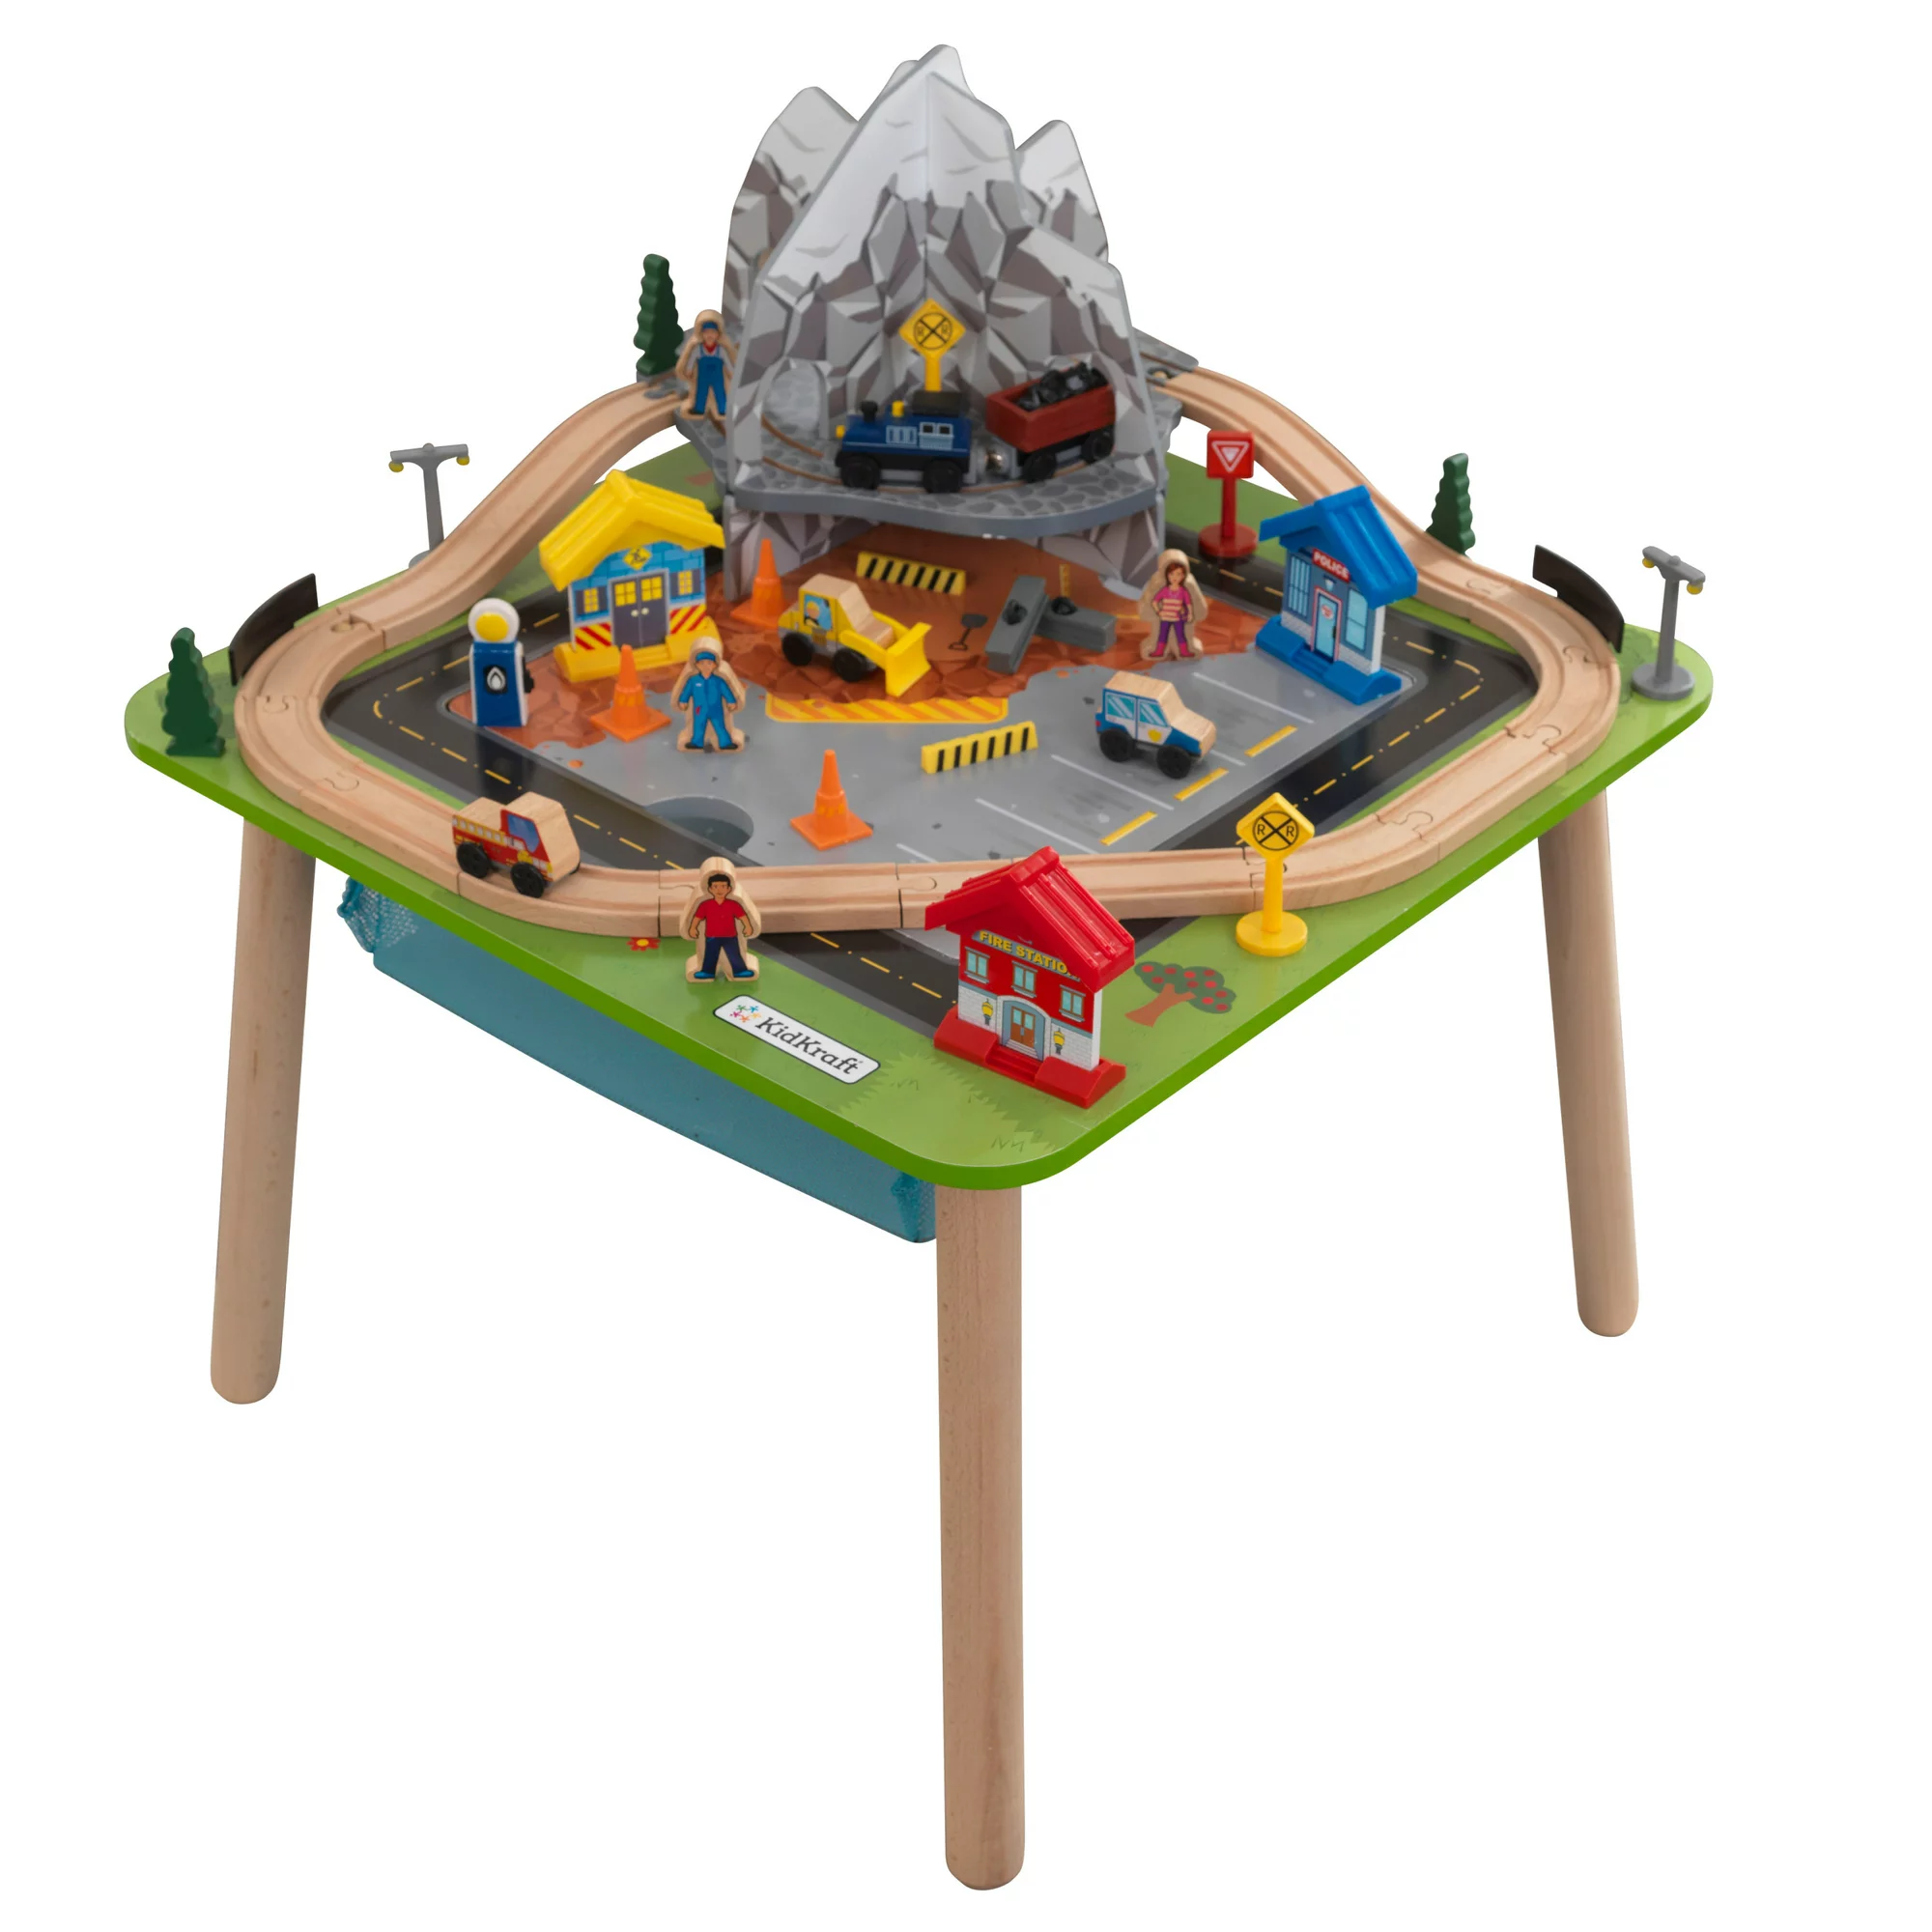 https://discounttoday.net/wp-content/uploads/2022/12/KidKraft-Rocky-Mountain-Wooden-Train-Set-Table-with-50-Pieces-and-Built-in-Storage.webp